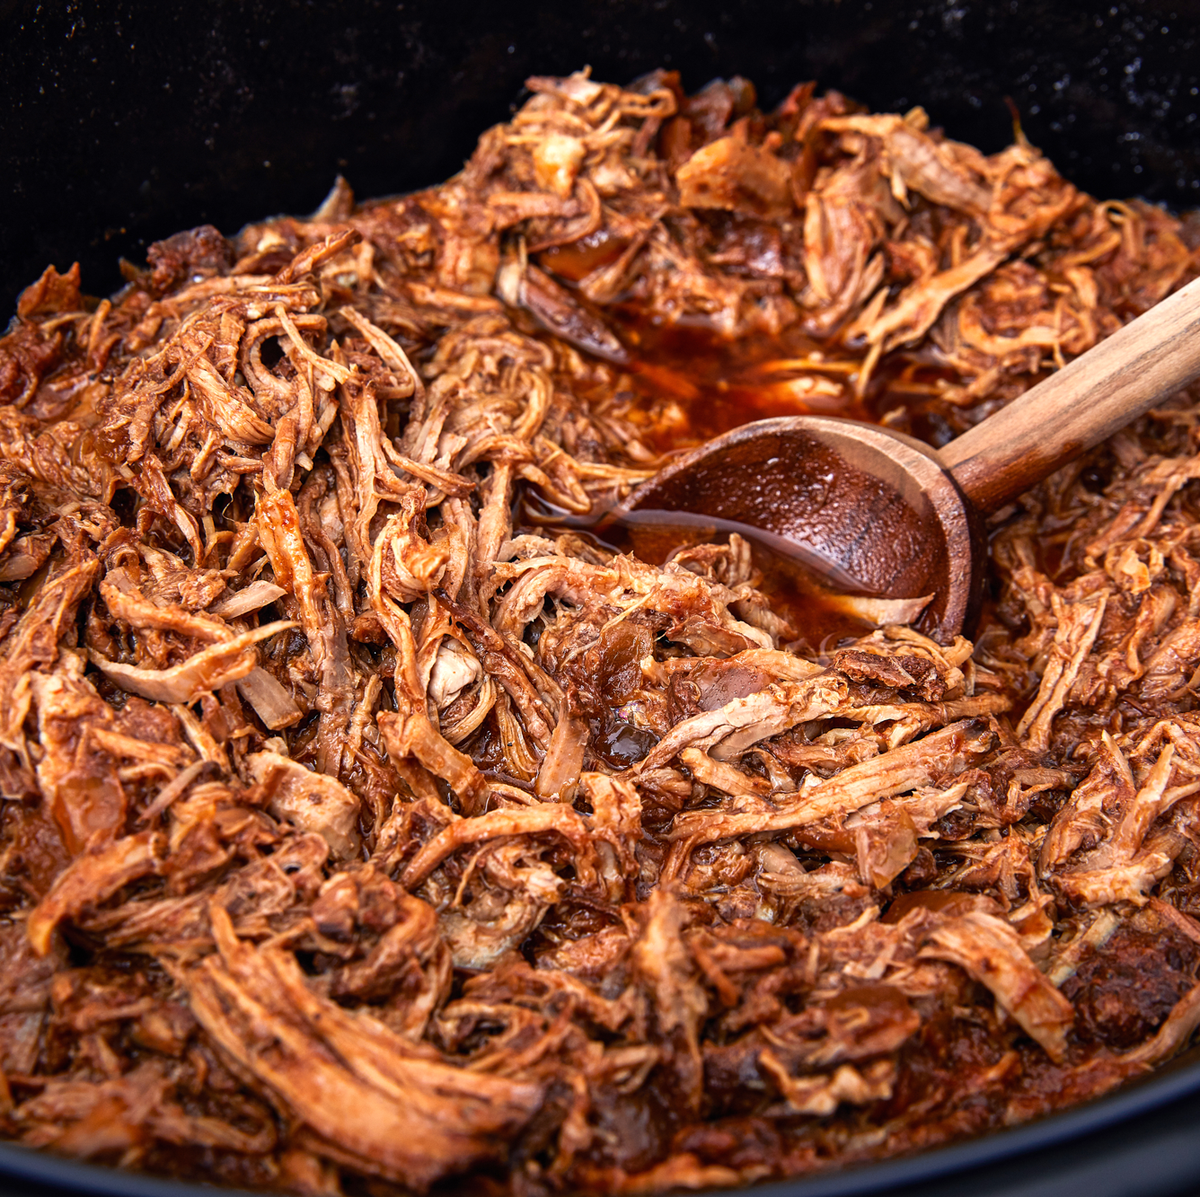 https://hips.hearstapps.com/hmg-prod/images/delish-slow-cooker-pulled-pork-horizontal-1-1539618654.png?crop=0.668xw:1.00xh;0.167xw,0&resize=1200:*